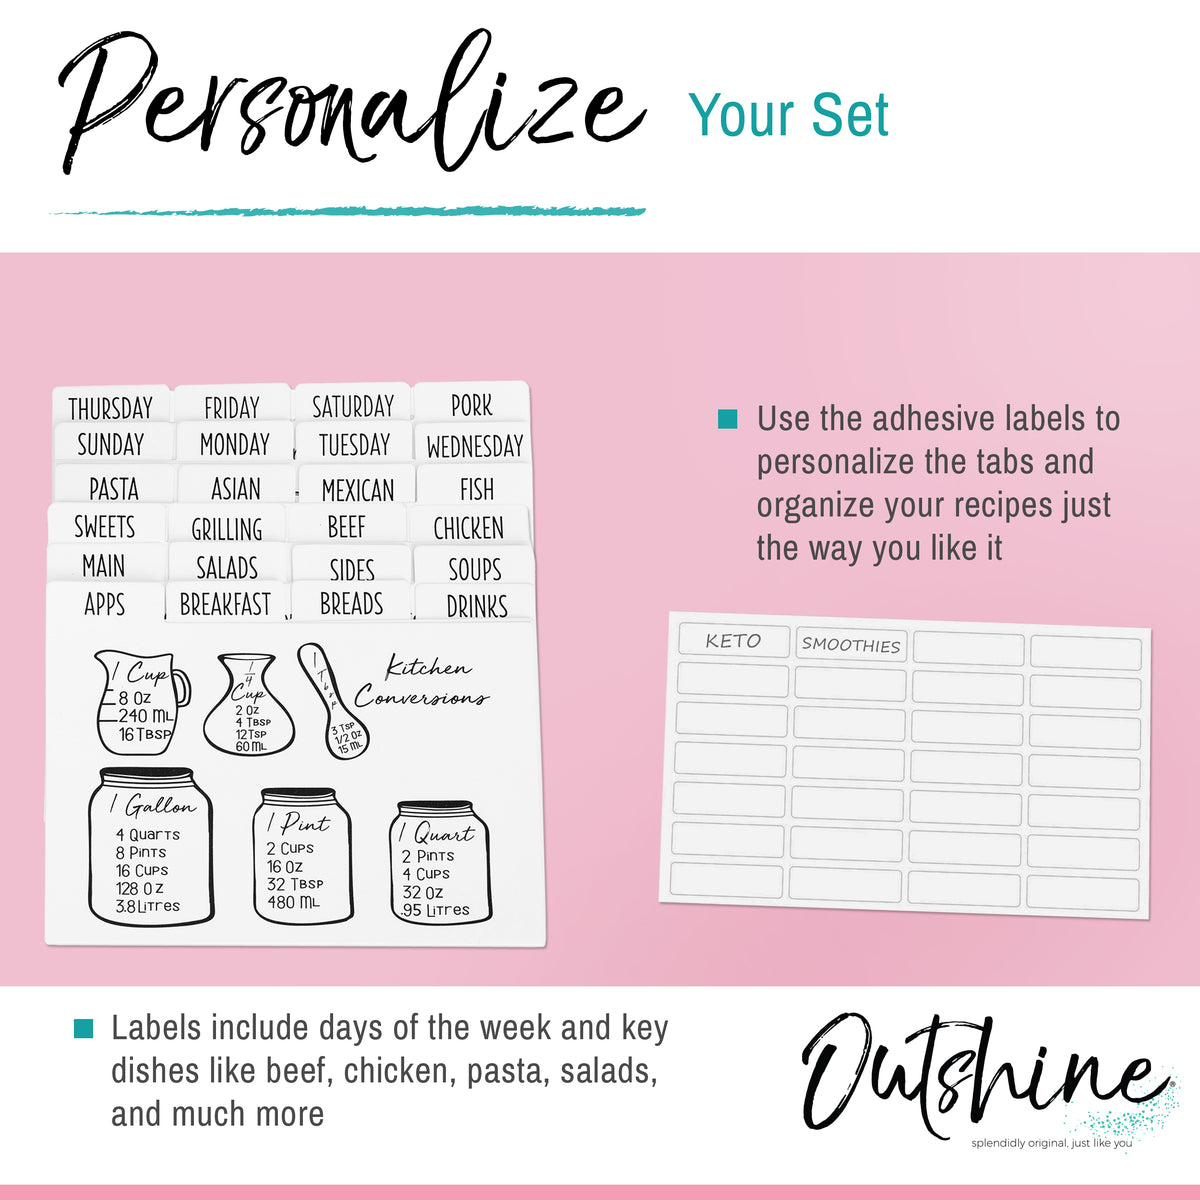 Outshine Co Premium Recipe Card Dividers 4x6 with Tabs (Set of 24) - White